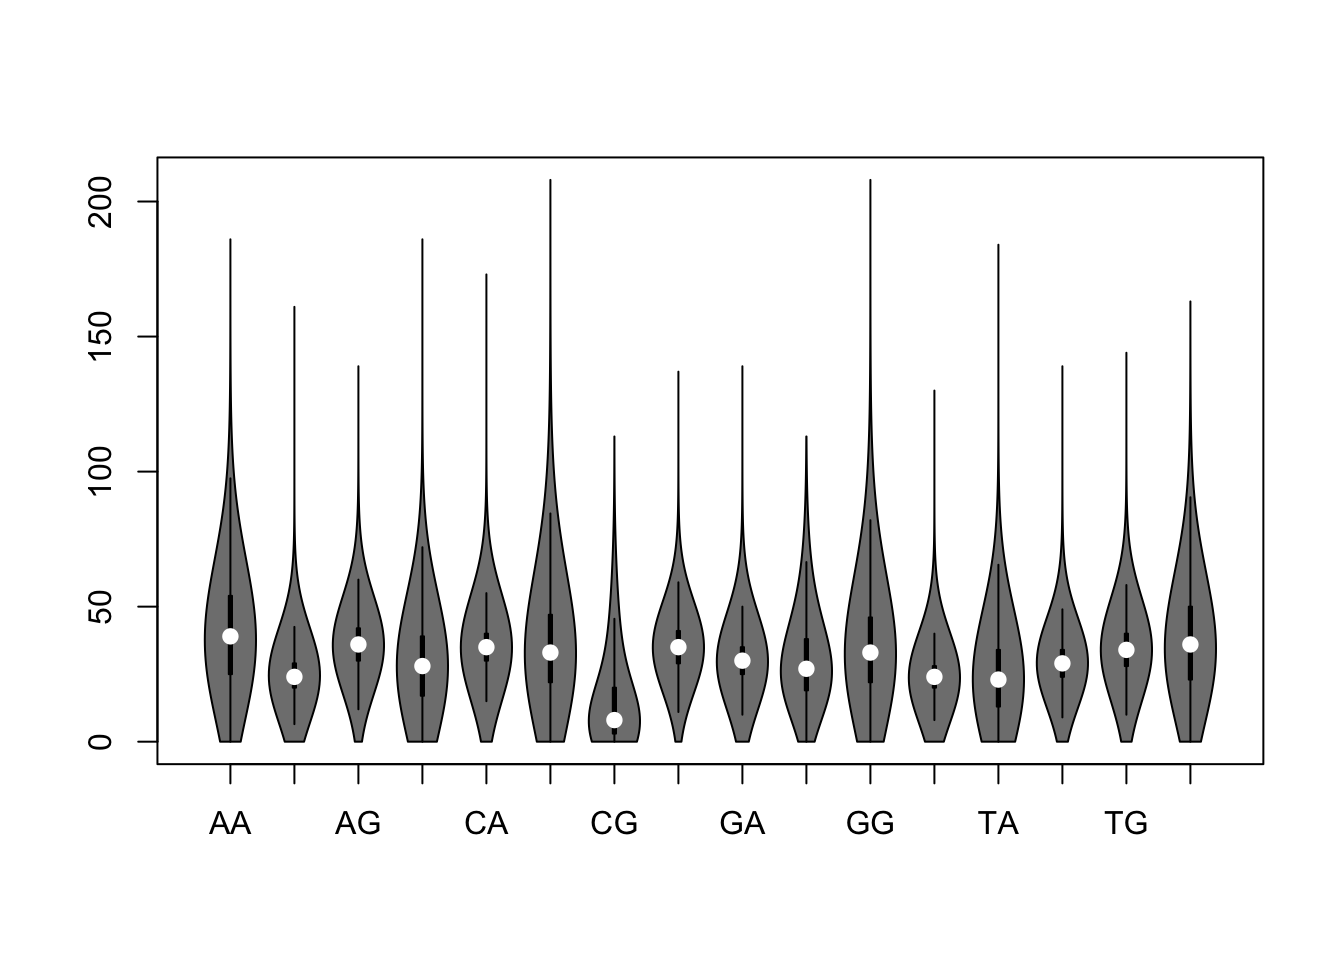 Violin plot of dinucleotide counts in promoter sequences